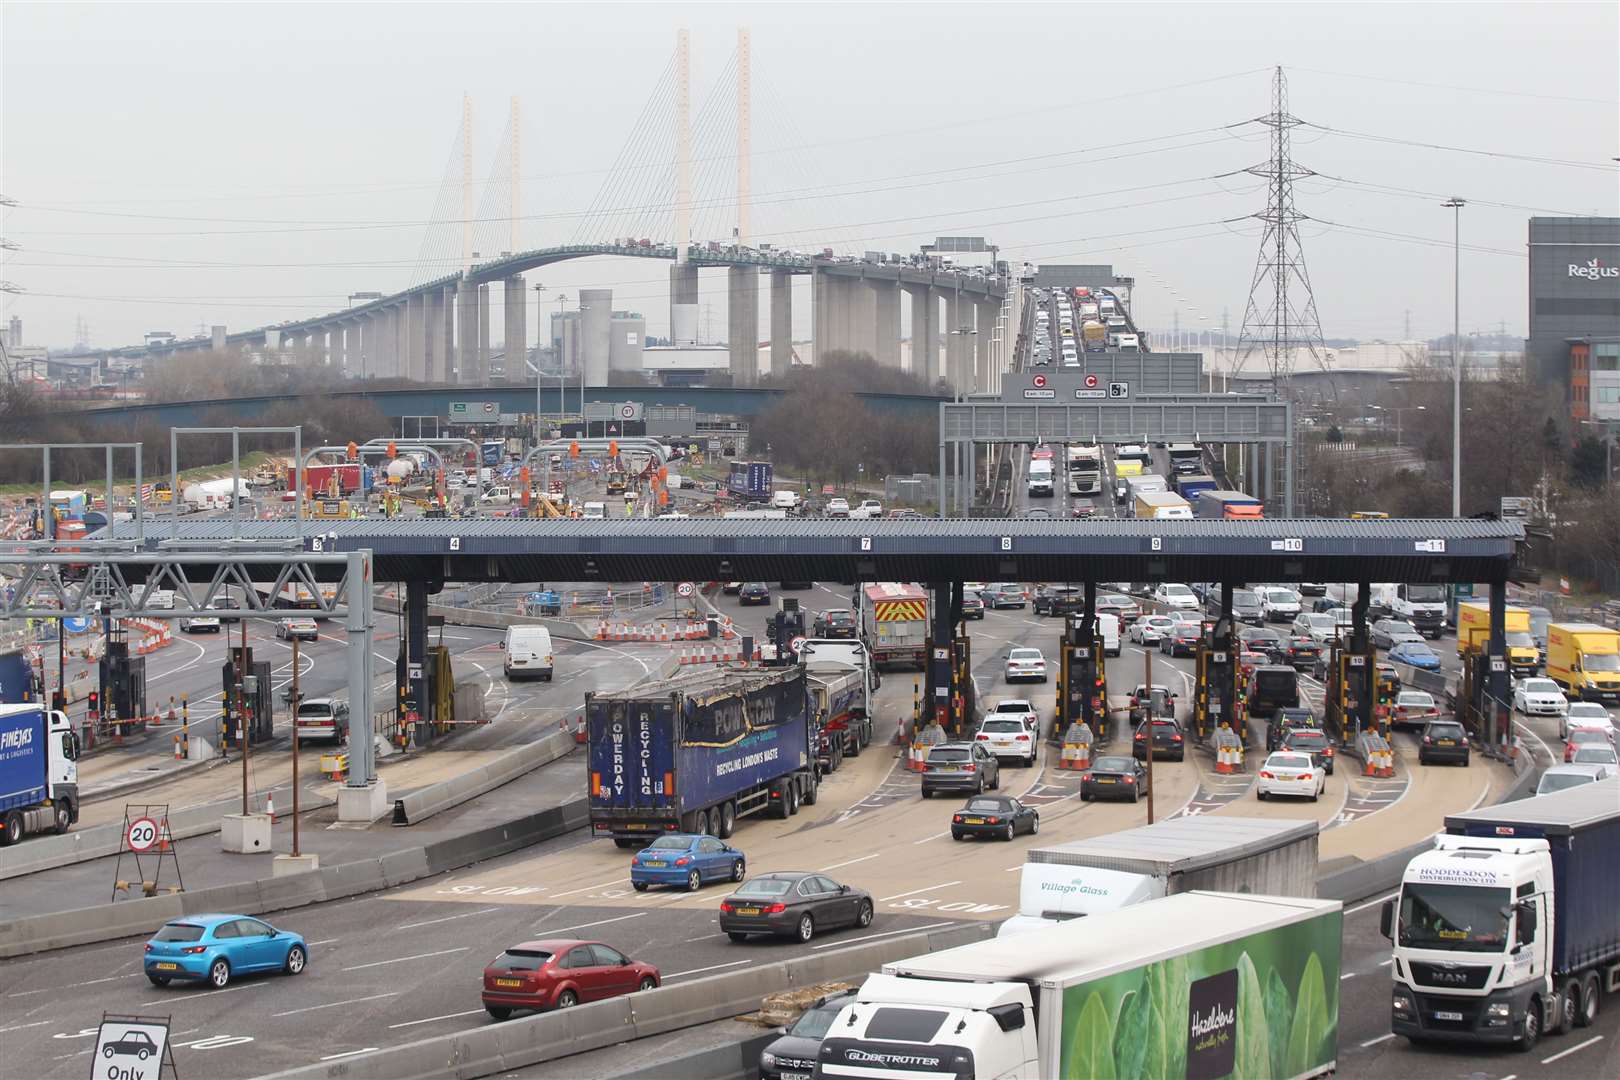 Dartford Crossing toll booths were removed in 2014 and replaced with an online payment system. Picture: John Westhrop.